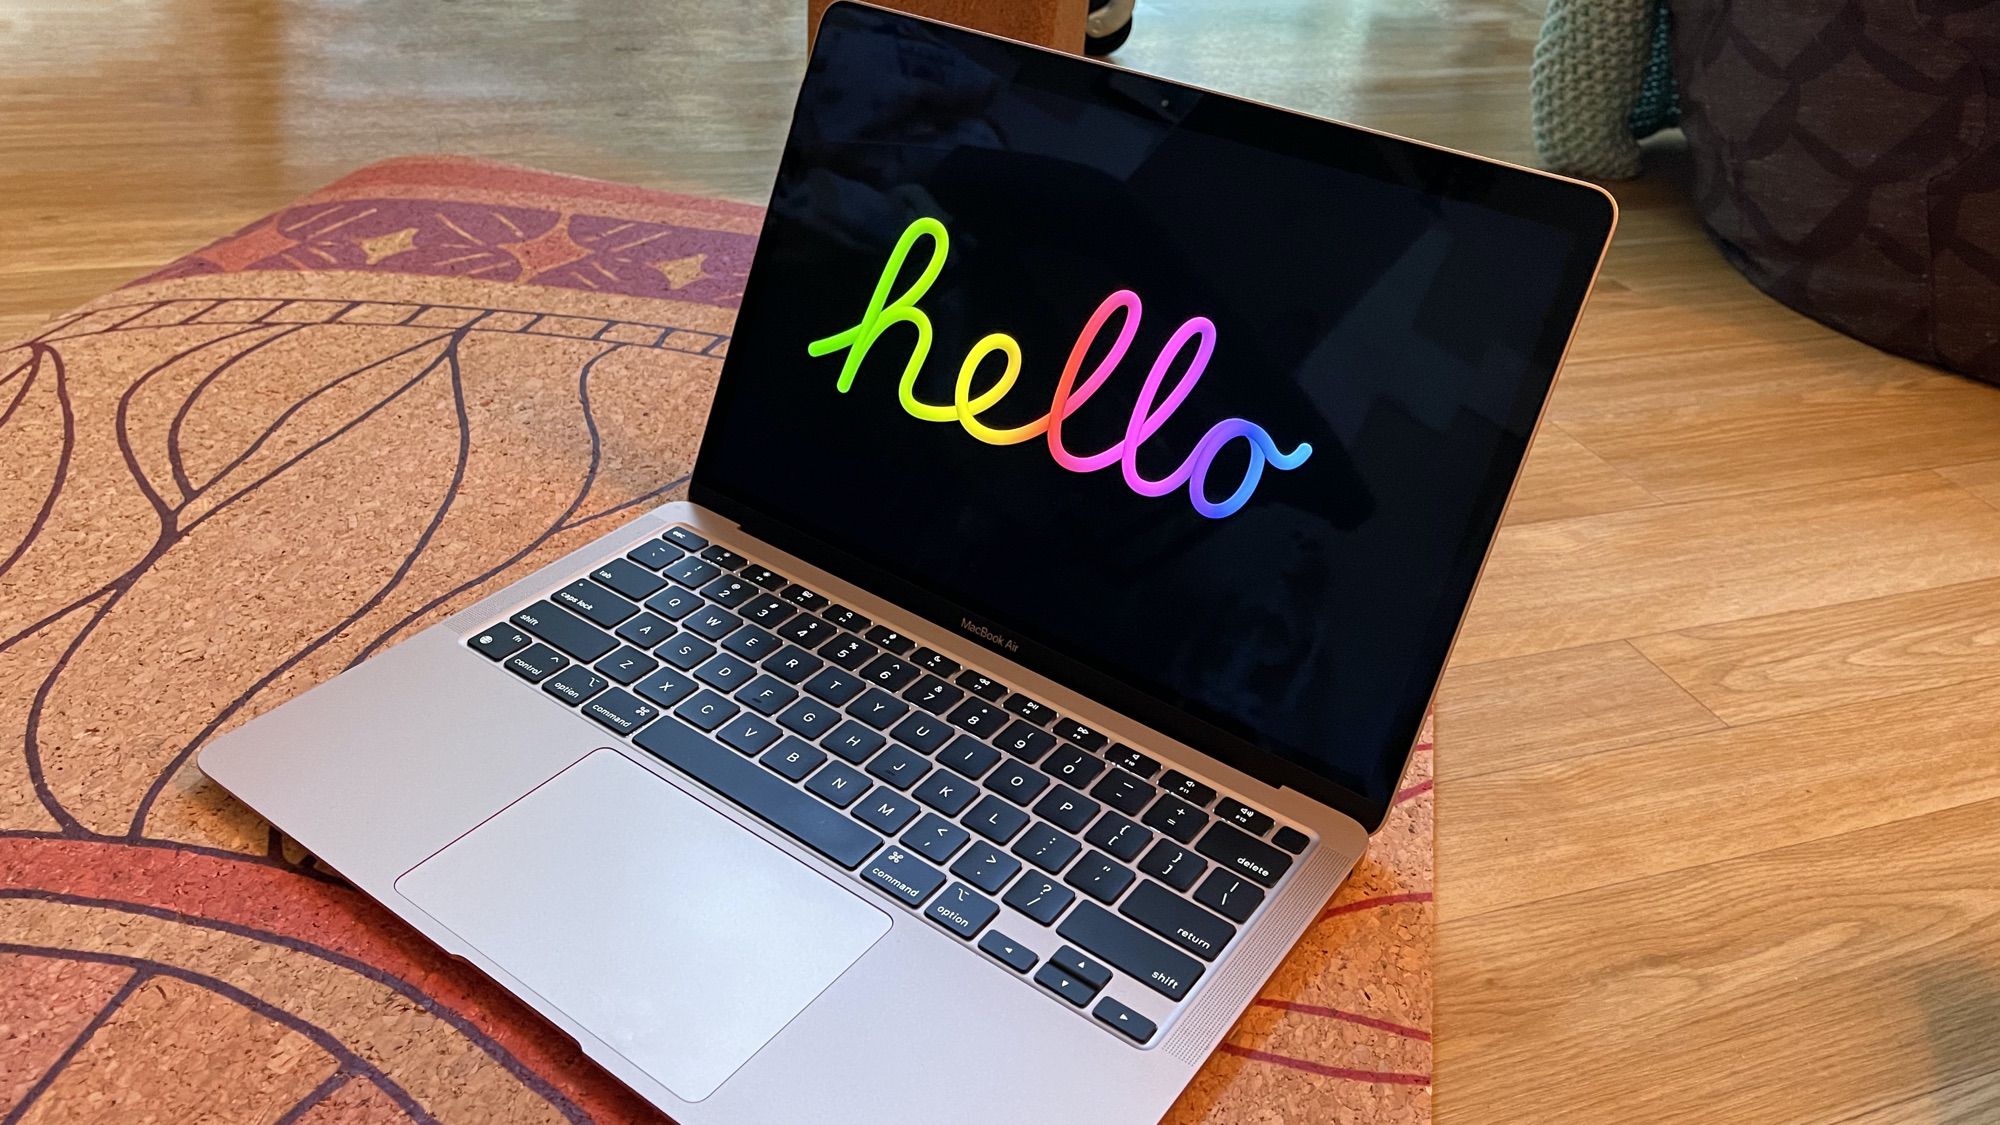 Apple adds a new “Hello” screen saver to macOS Big Sur 11.3